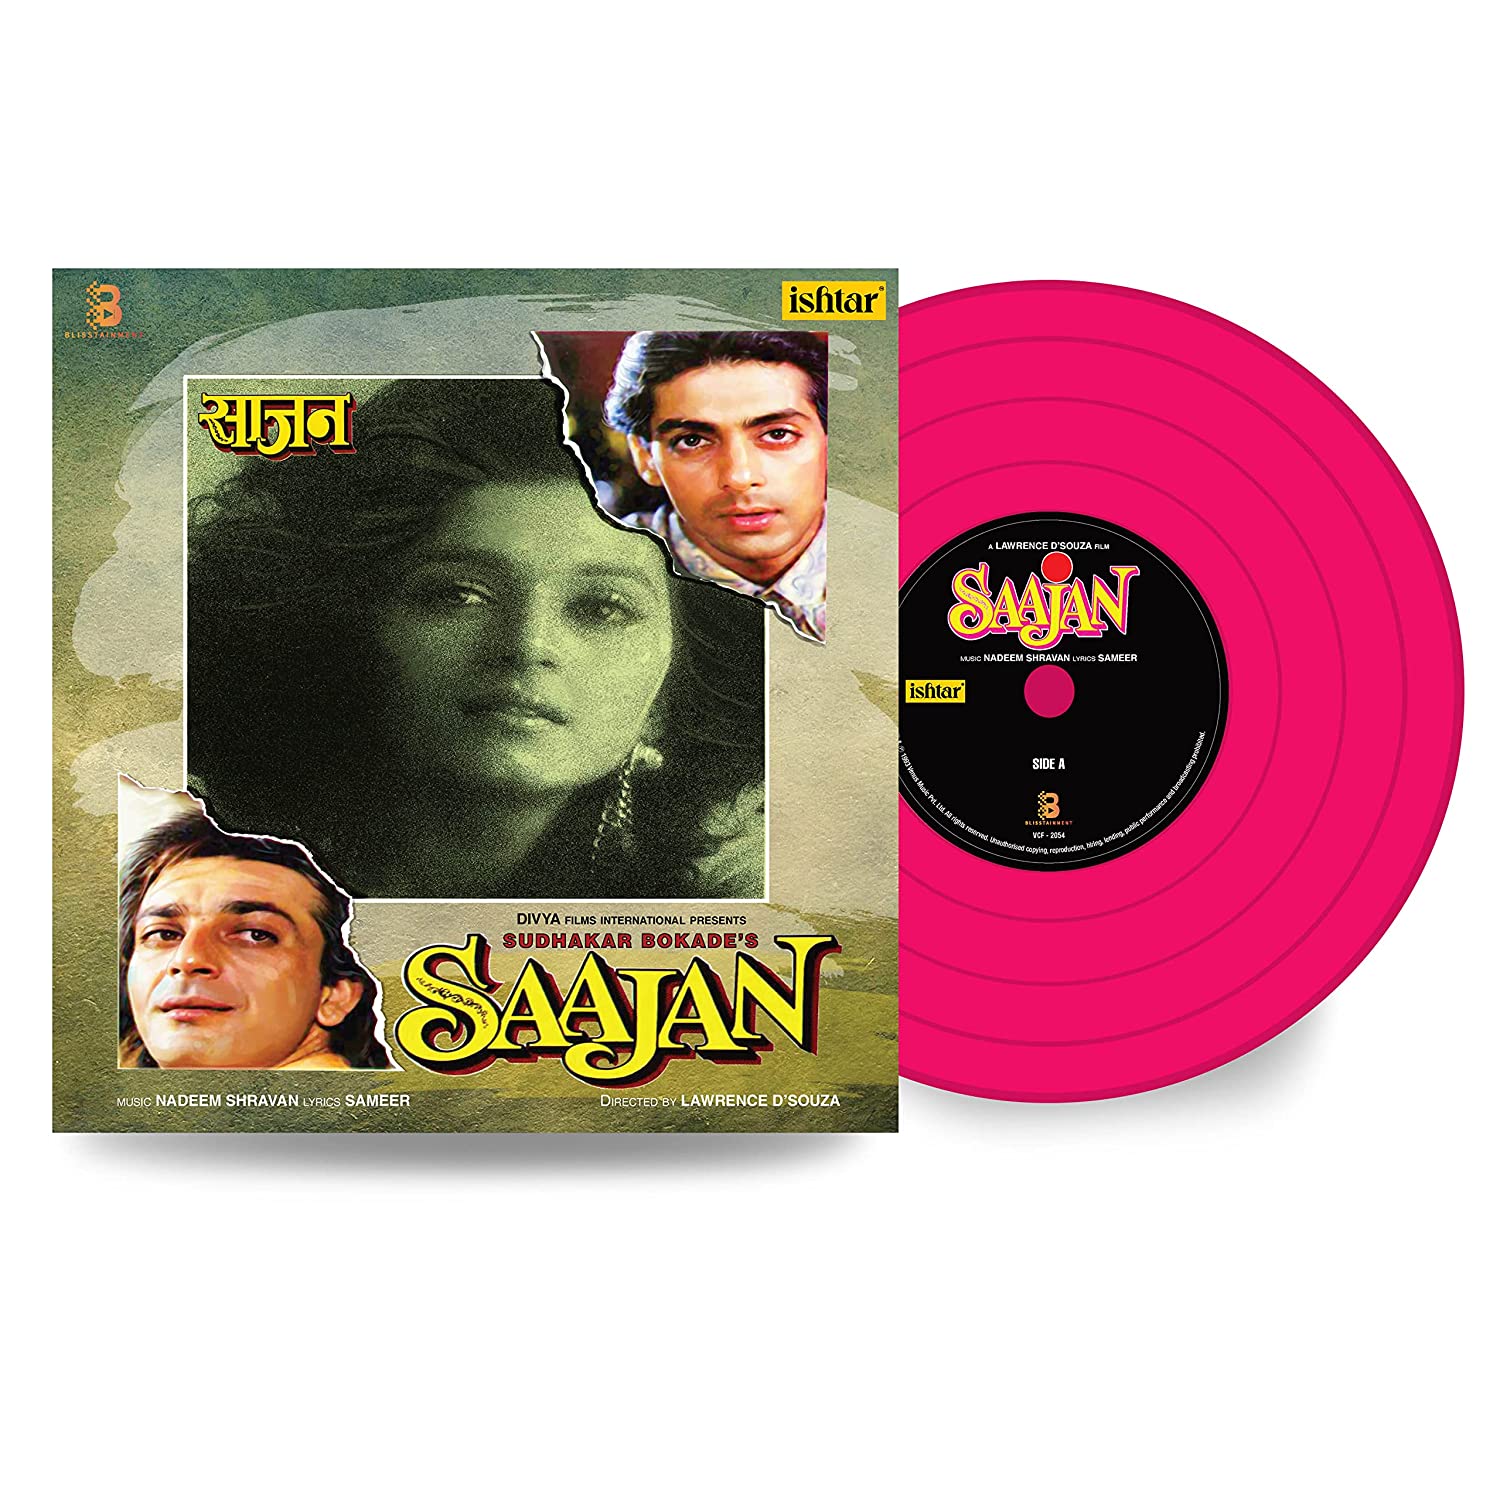 Saajan - Cover Book Fold - Pink Colour - LP Record IN STOCK